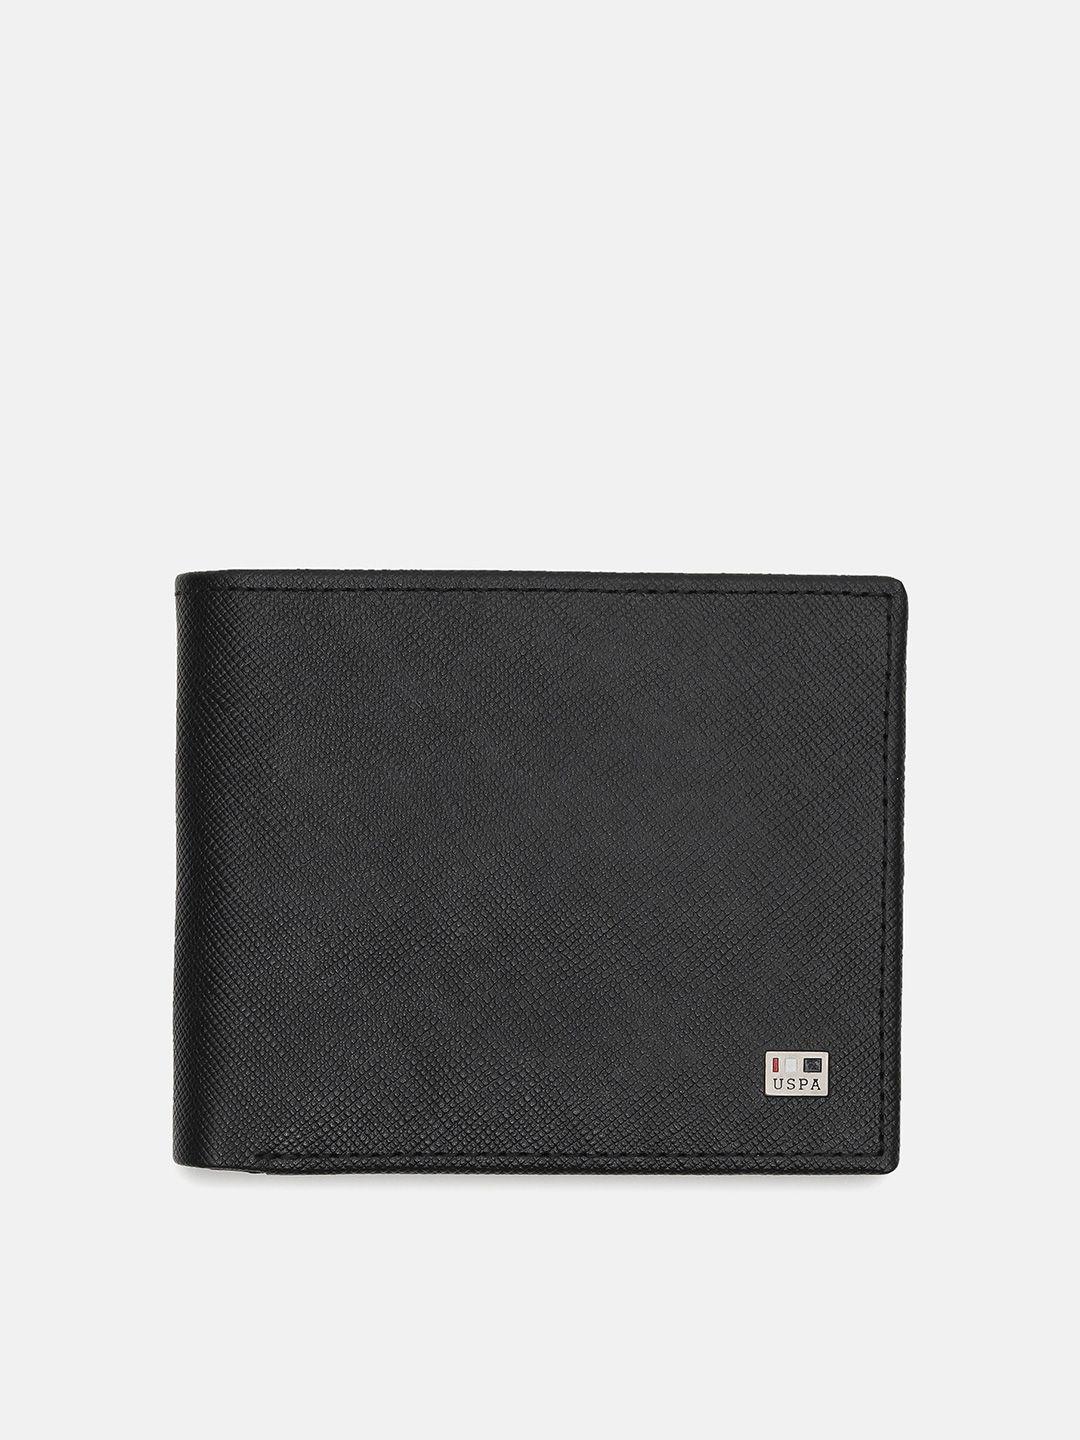 u-s-polo-assn-men-black-textured-leather-two-fold-wallet